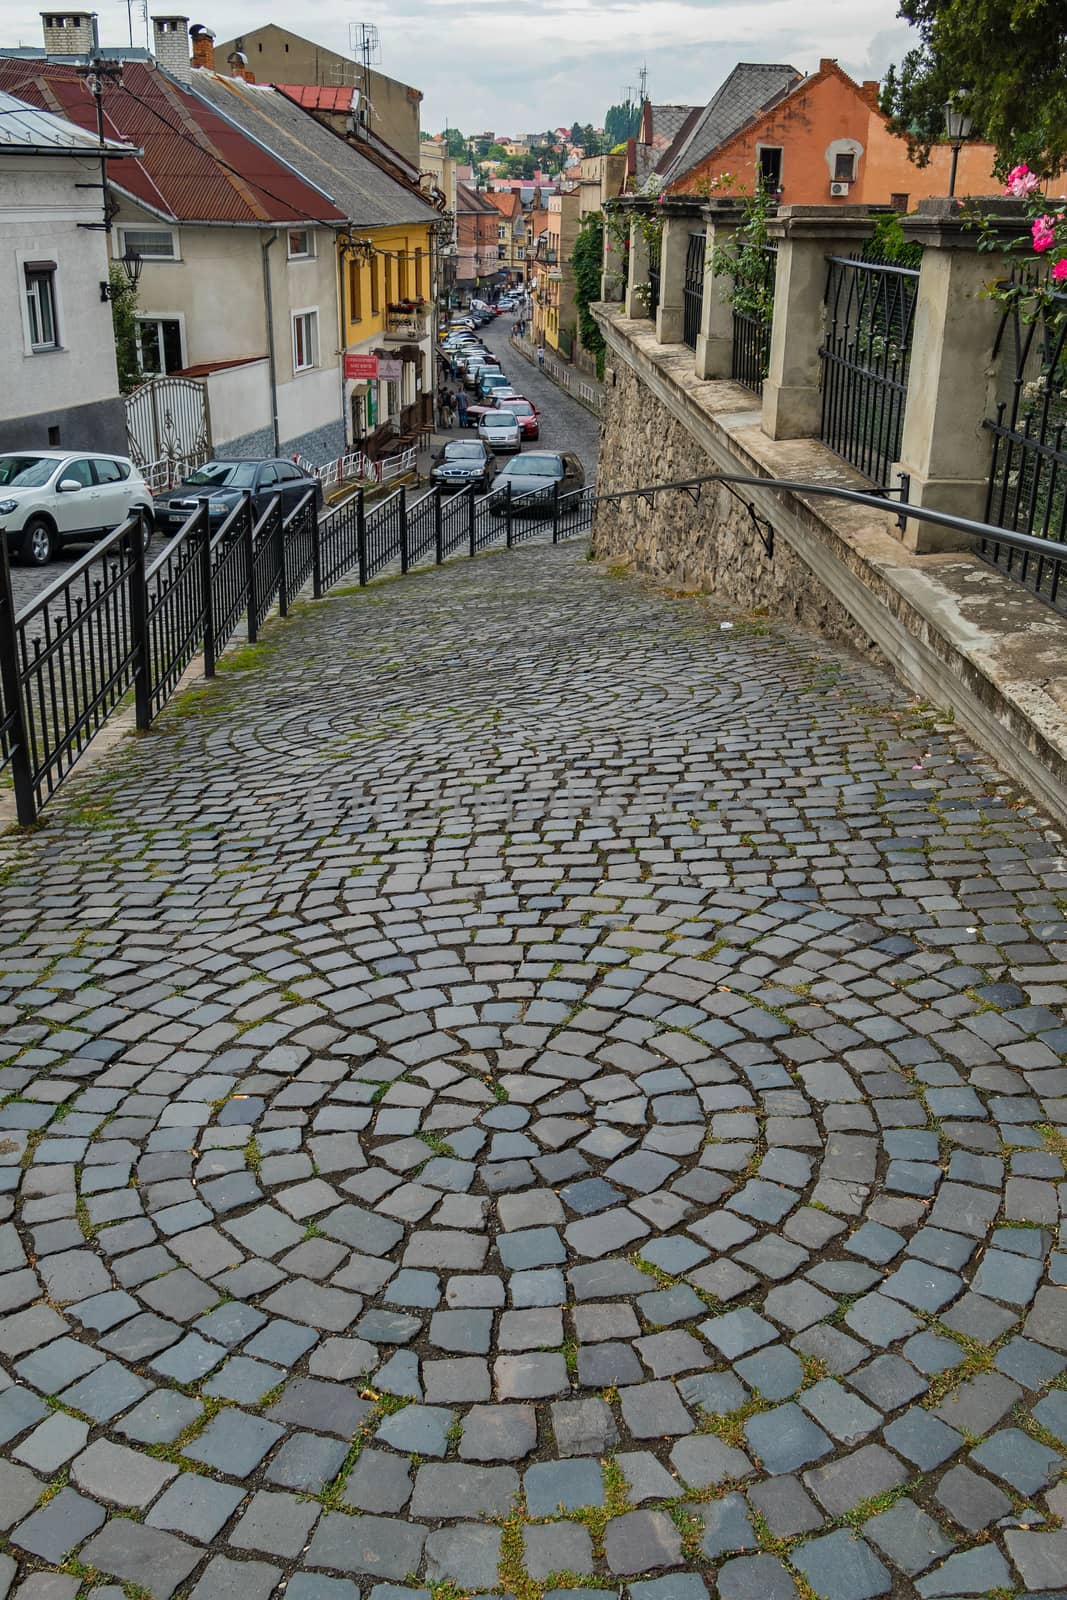 Descent on a city street laid out of tiles with patterns in the form of a circle going down. With nice houses and cars parked on one side. by Adamchuk